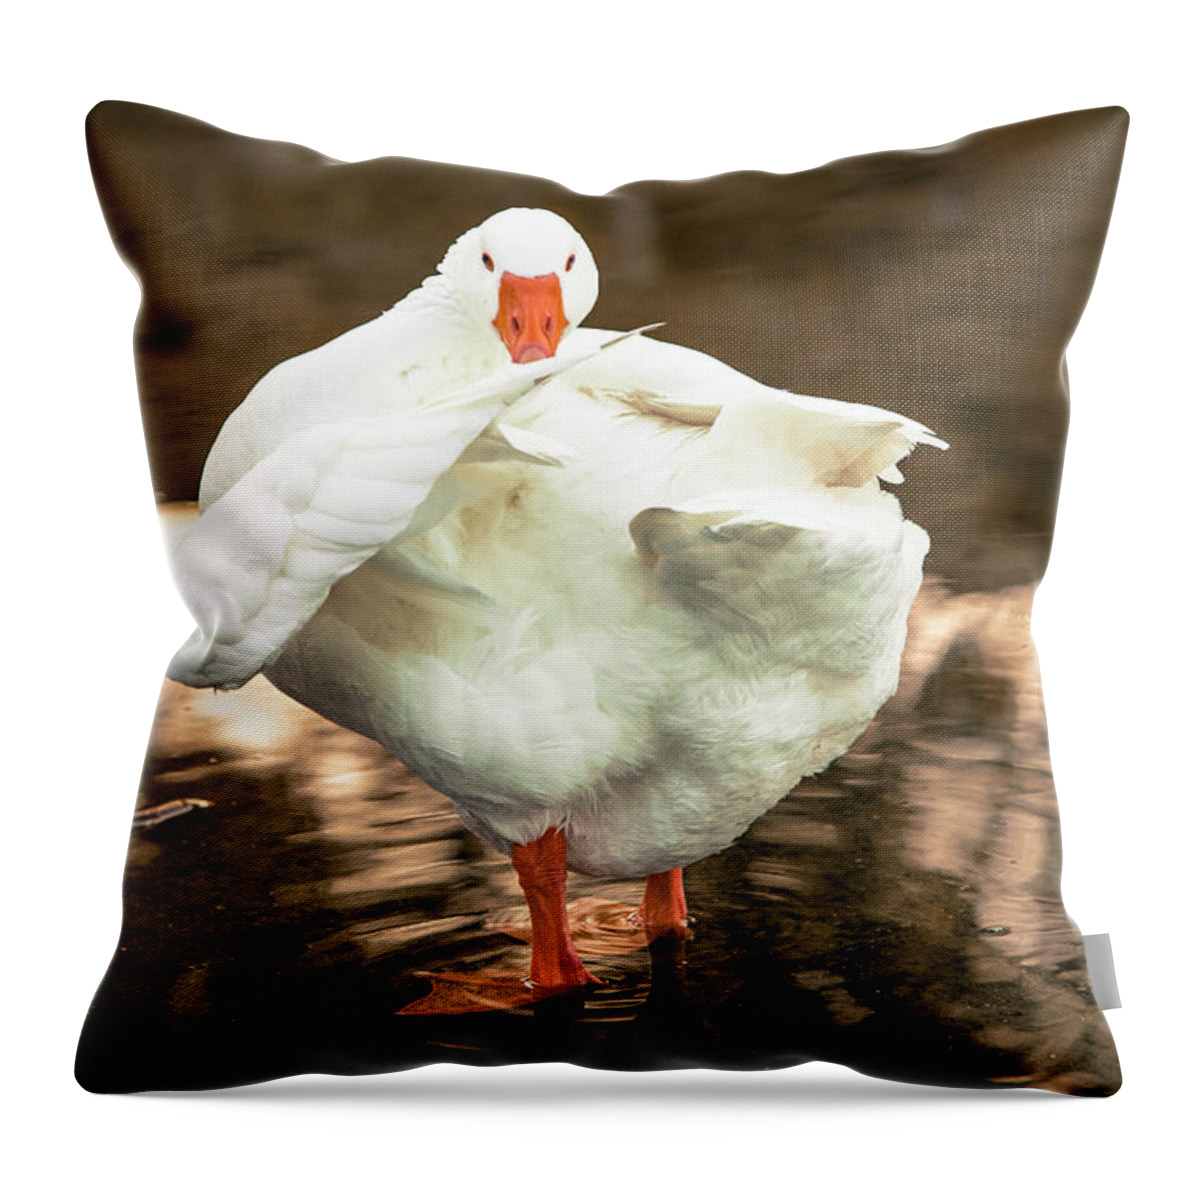 Photograph Throw Pillow featuring the photograph One Million Dollars by Jason Hughes